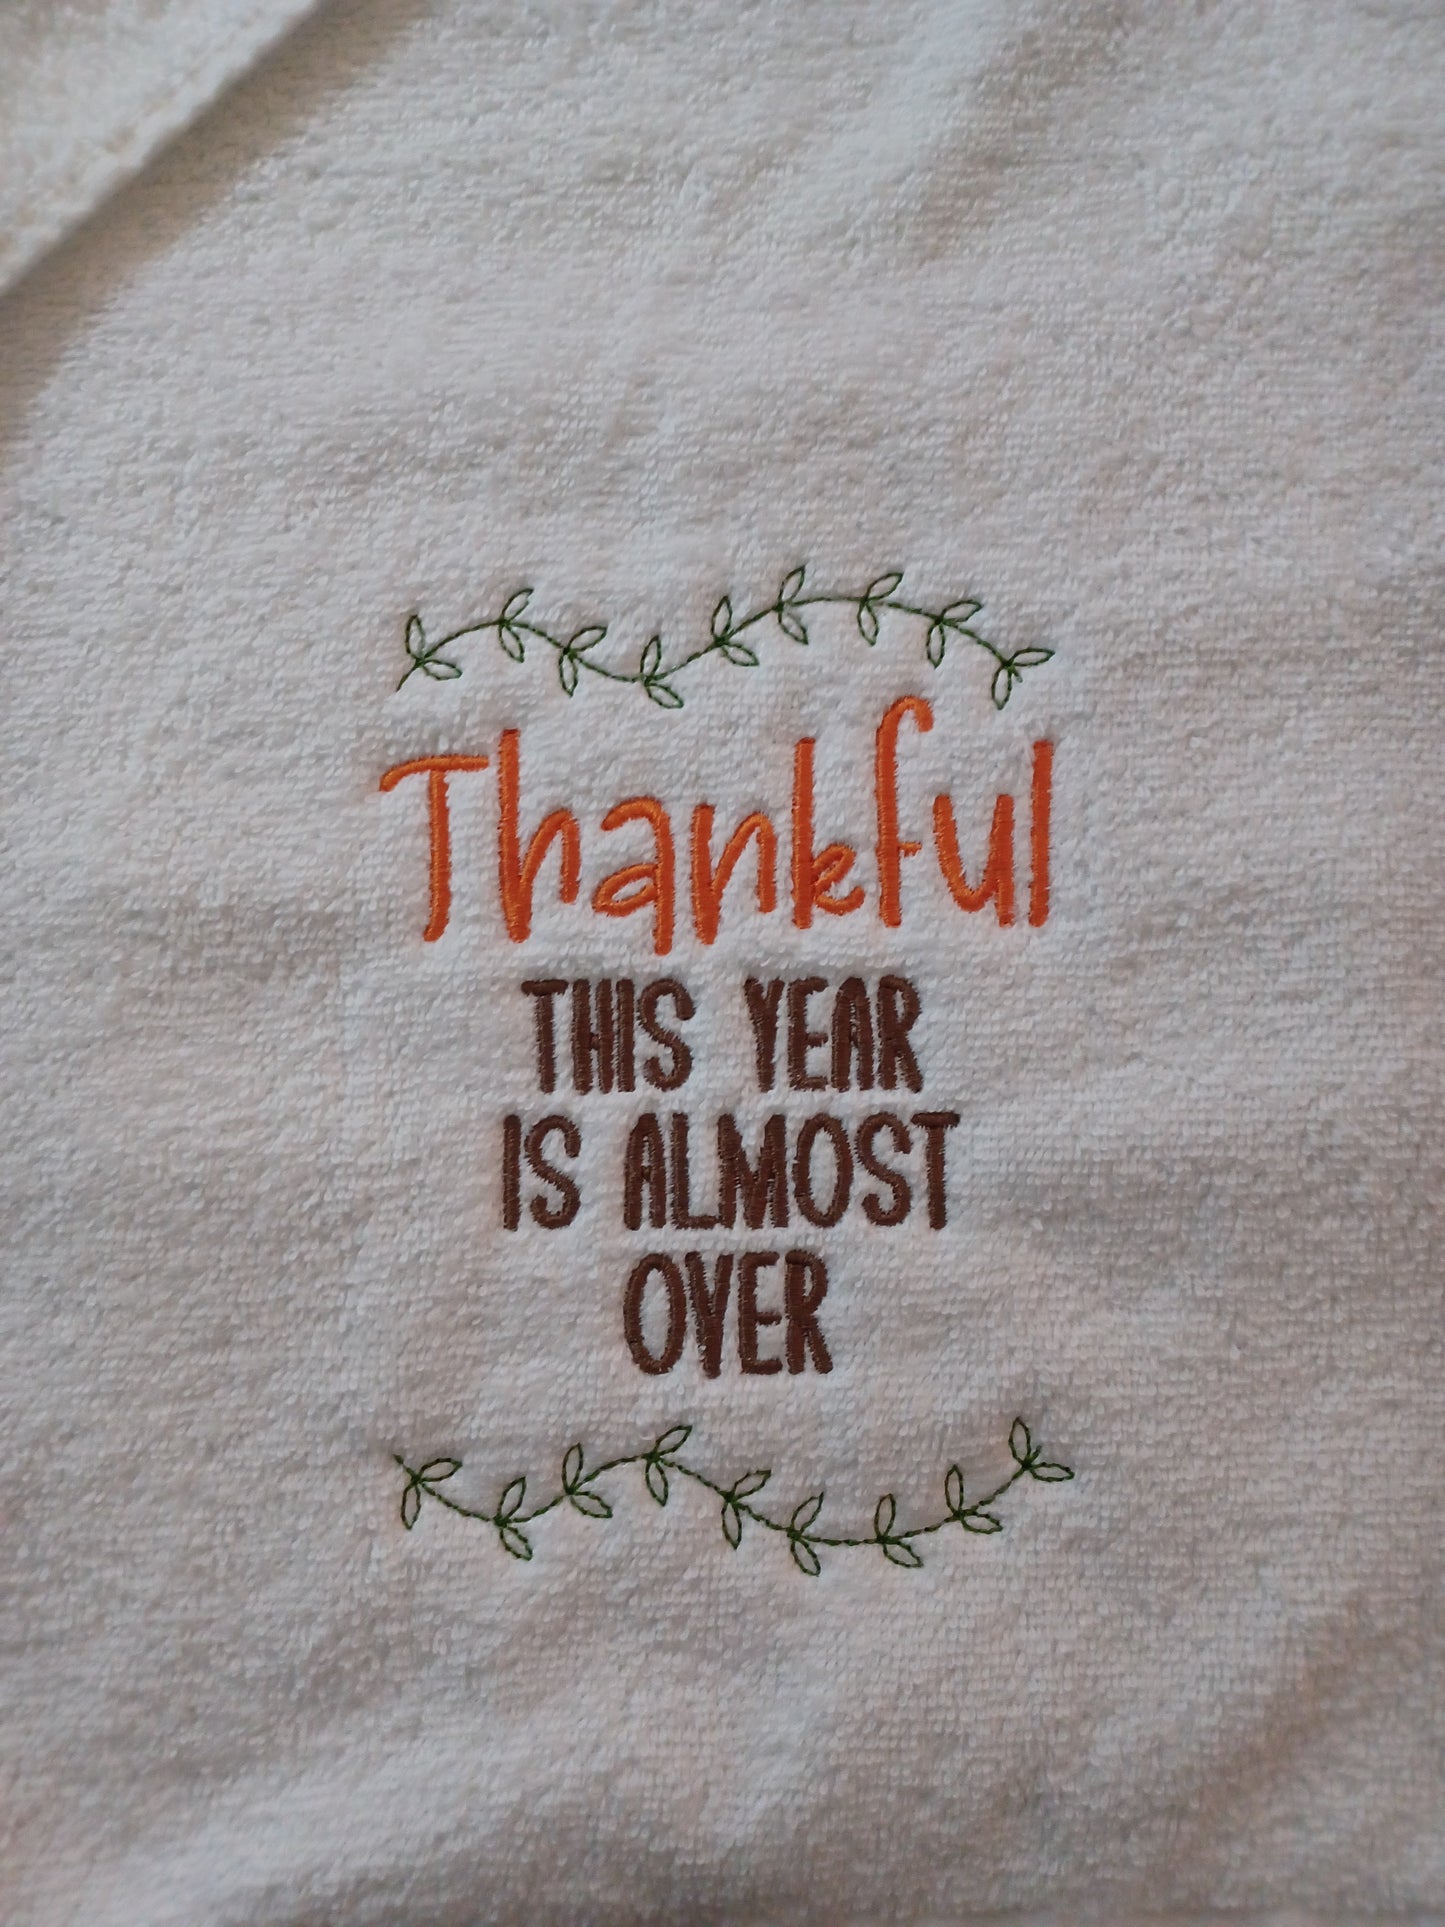 Thankful This Year Is Almost Over (Embroidered CYO)